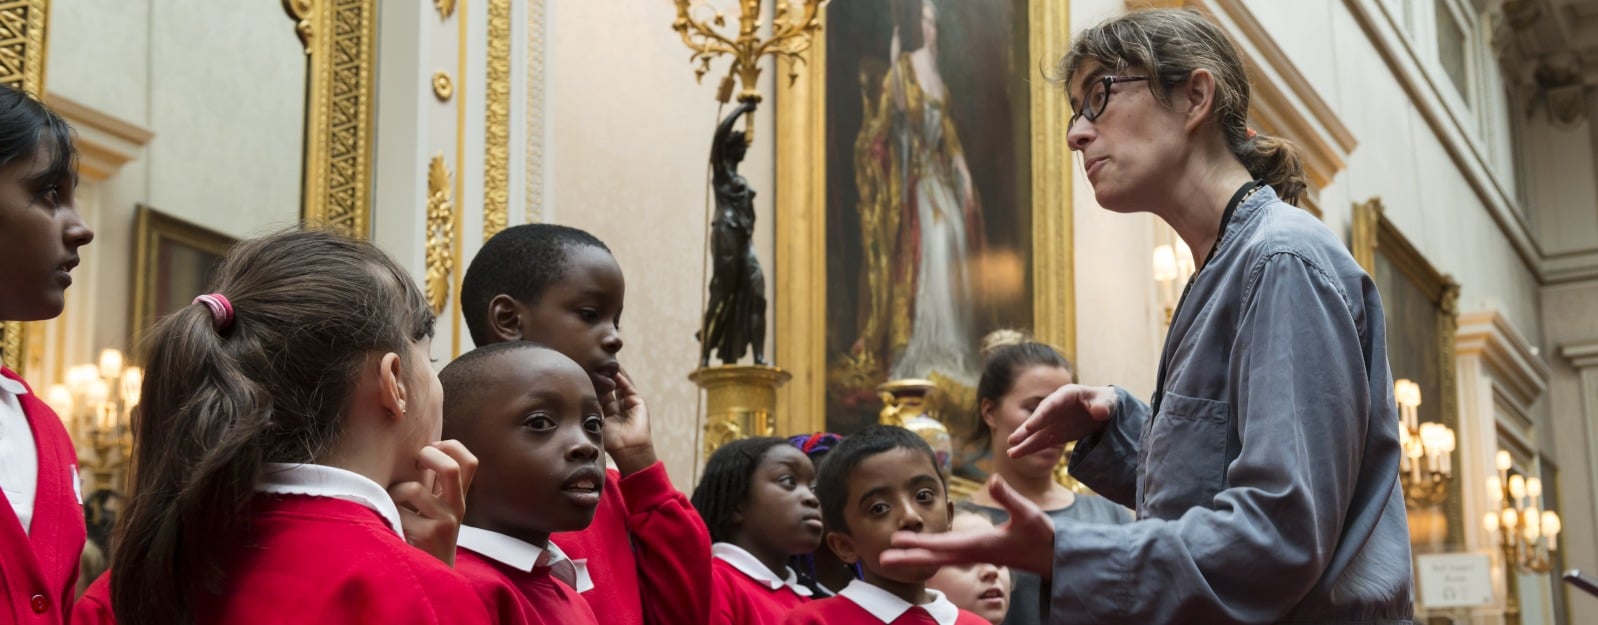 Pupils visit the Picture Gallery, Buckingham Palace